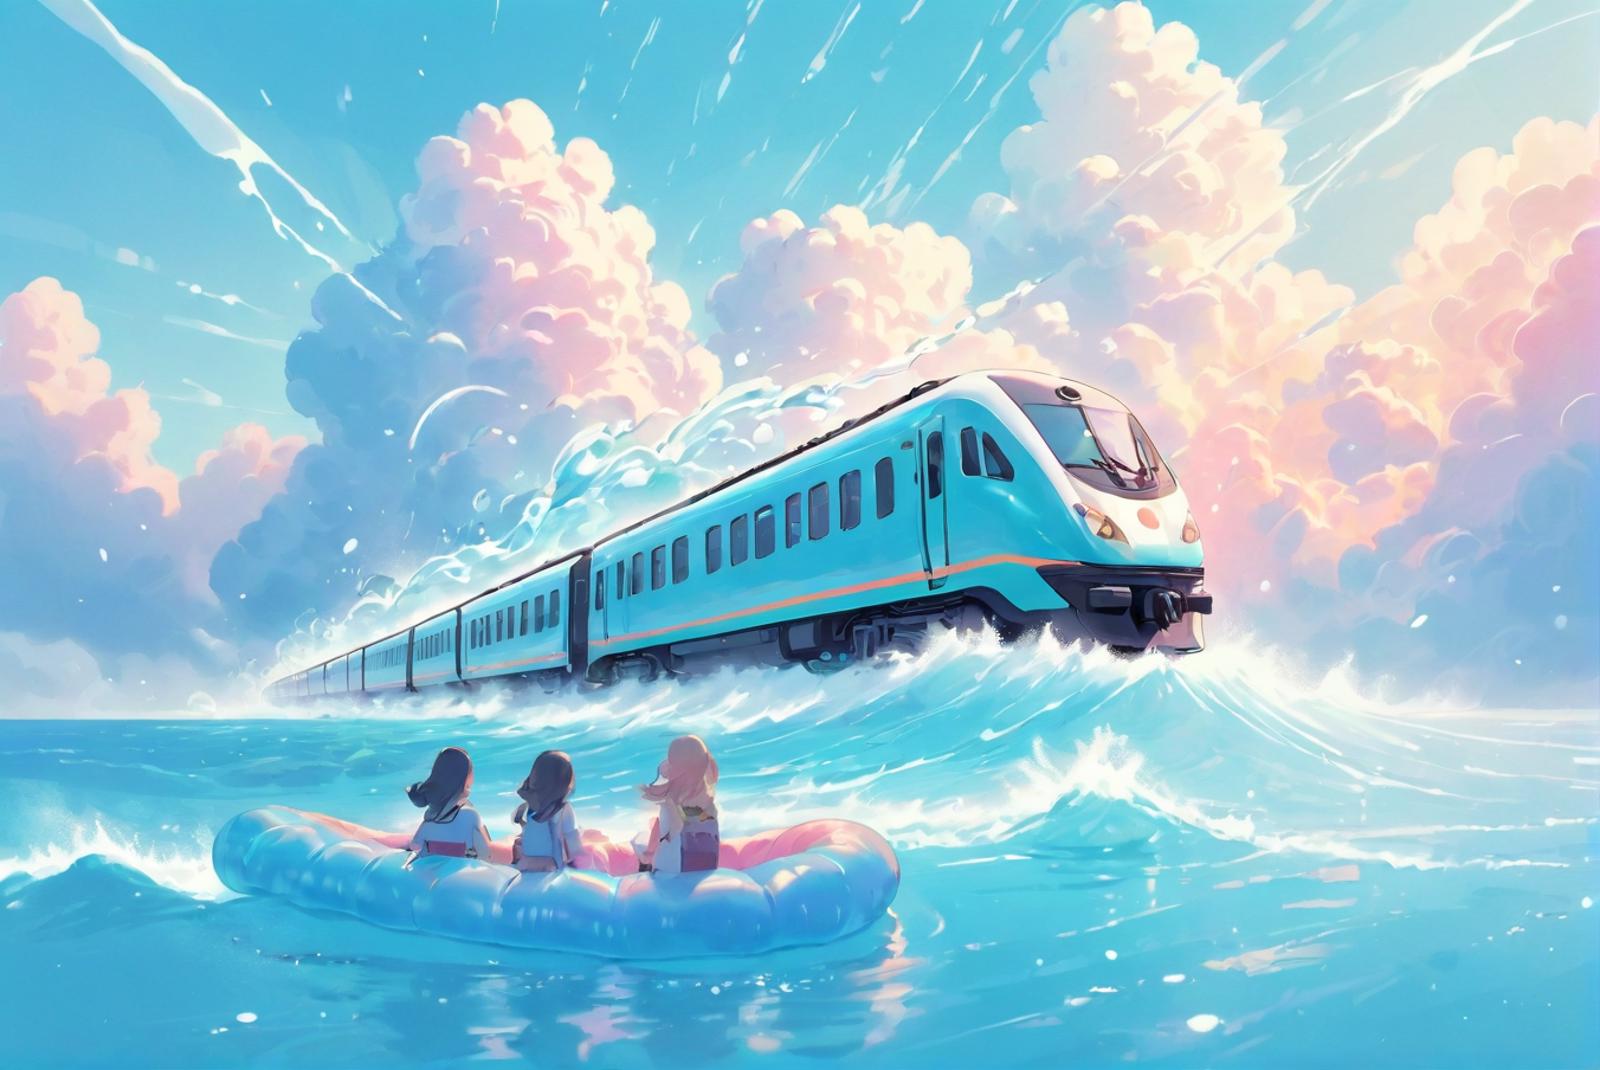 Three Girls Riding On A Raft In The Water As A Train Passes By